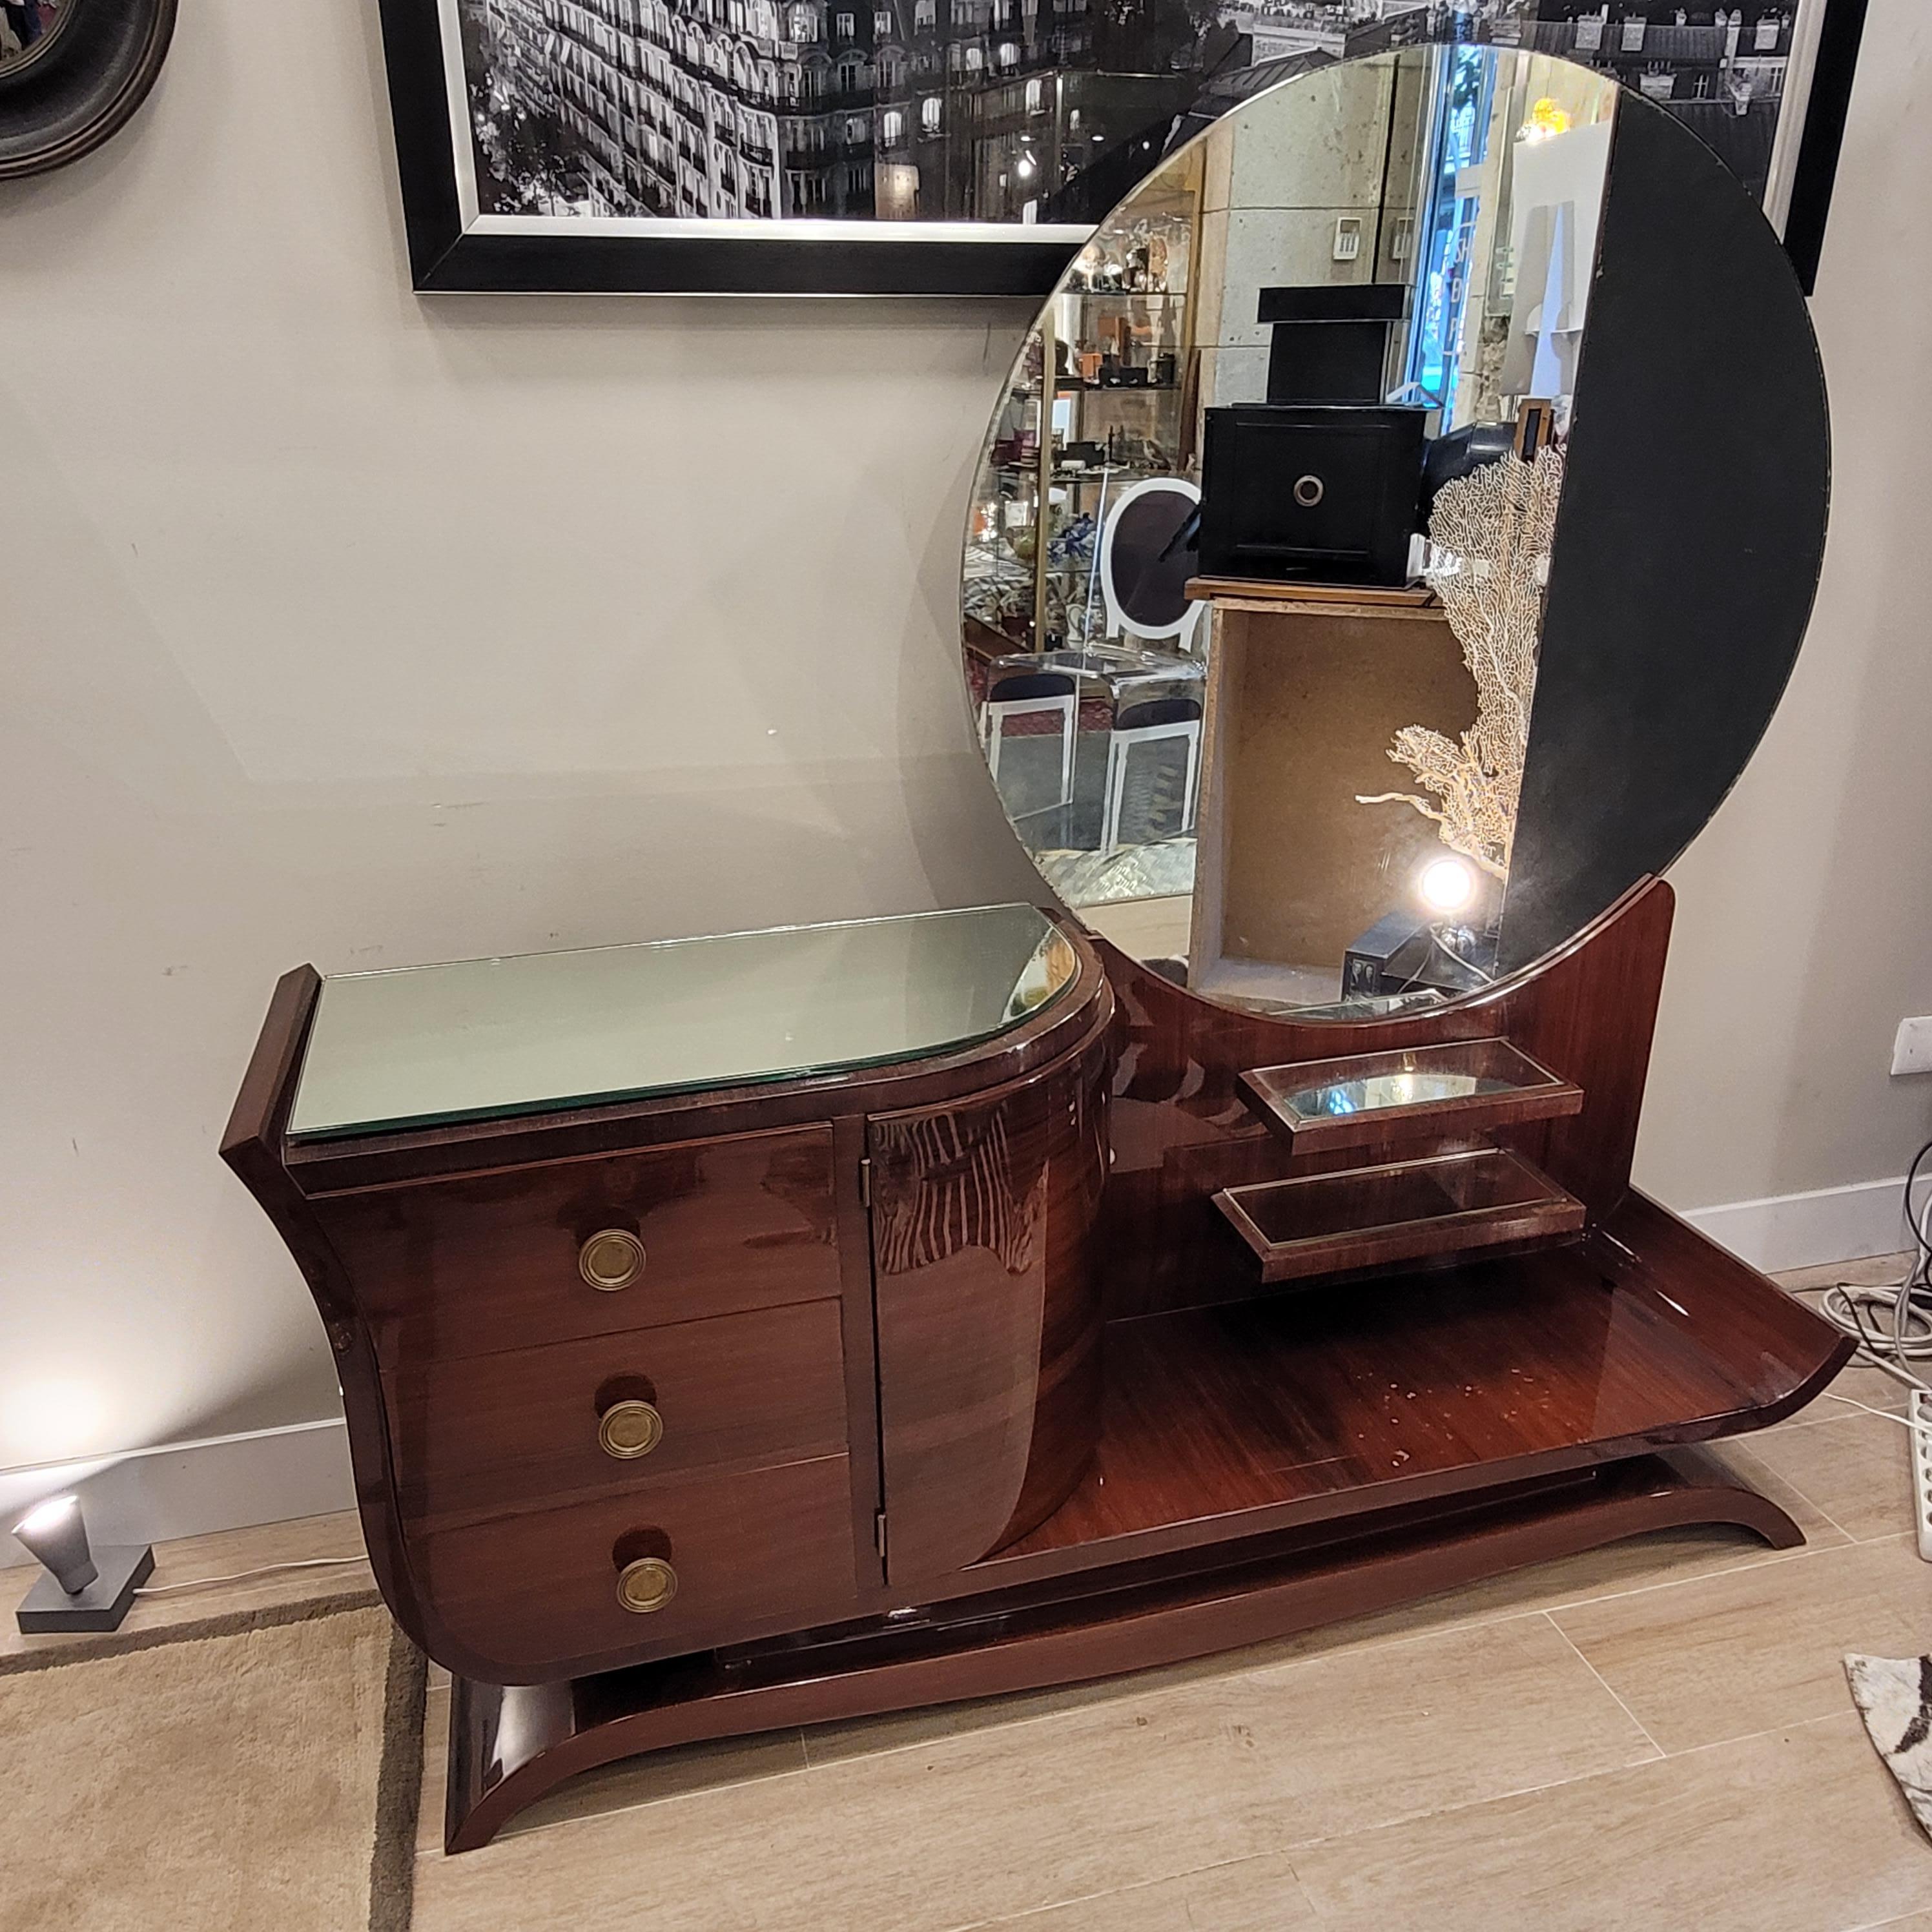 Exquisite Art Deco dressing table made around 1930 in mahogany wood. With elegant shapes, this dressing table is configured in two different parts, the furniture itself and the completely circular mirror. Its design is asymmetrical, playing with the